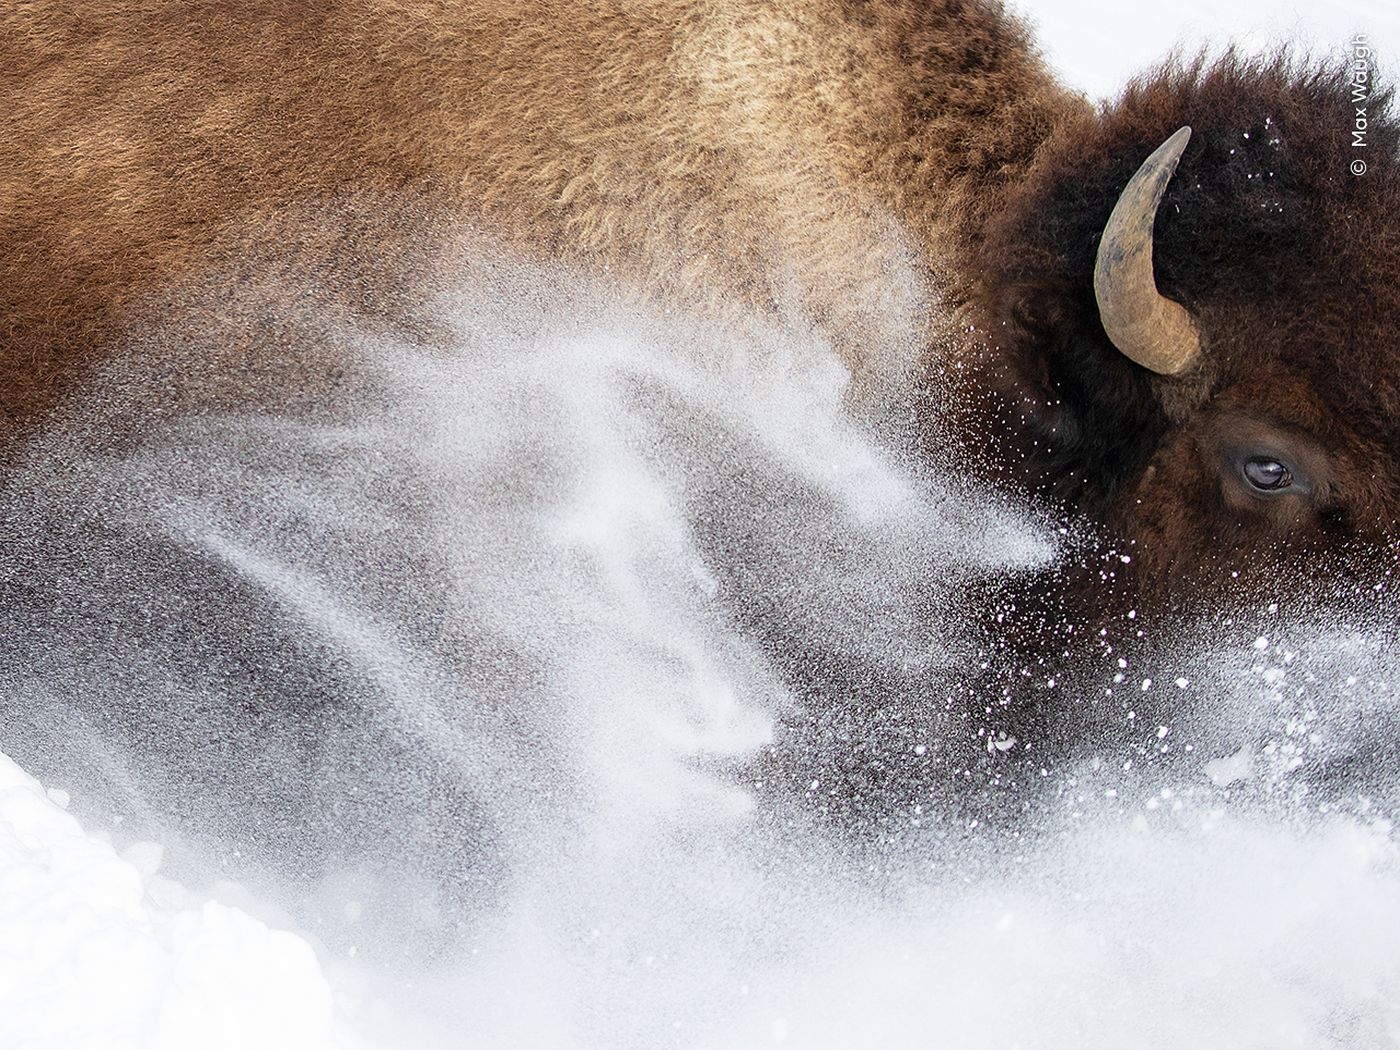 a close-up shot of the side of a bison's head and shoulders as it runs, with snow swirling around it